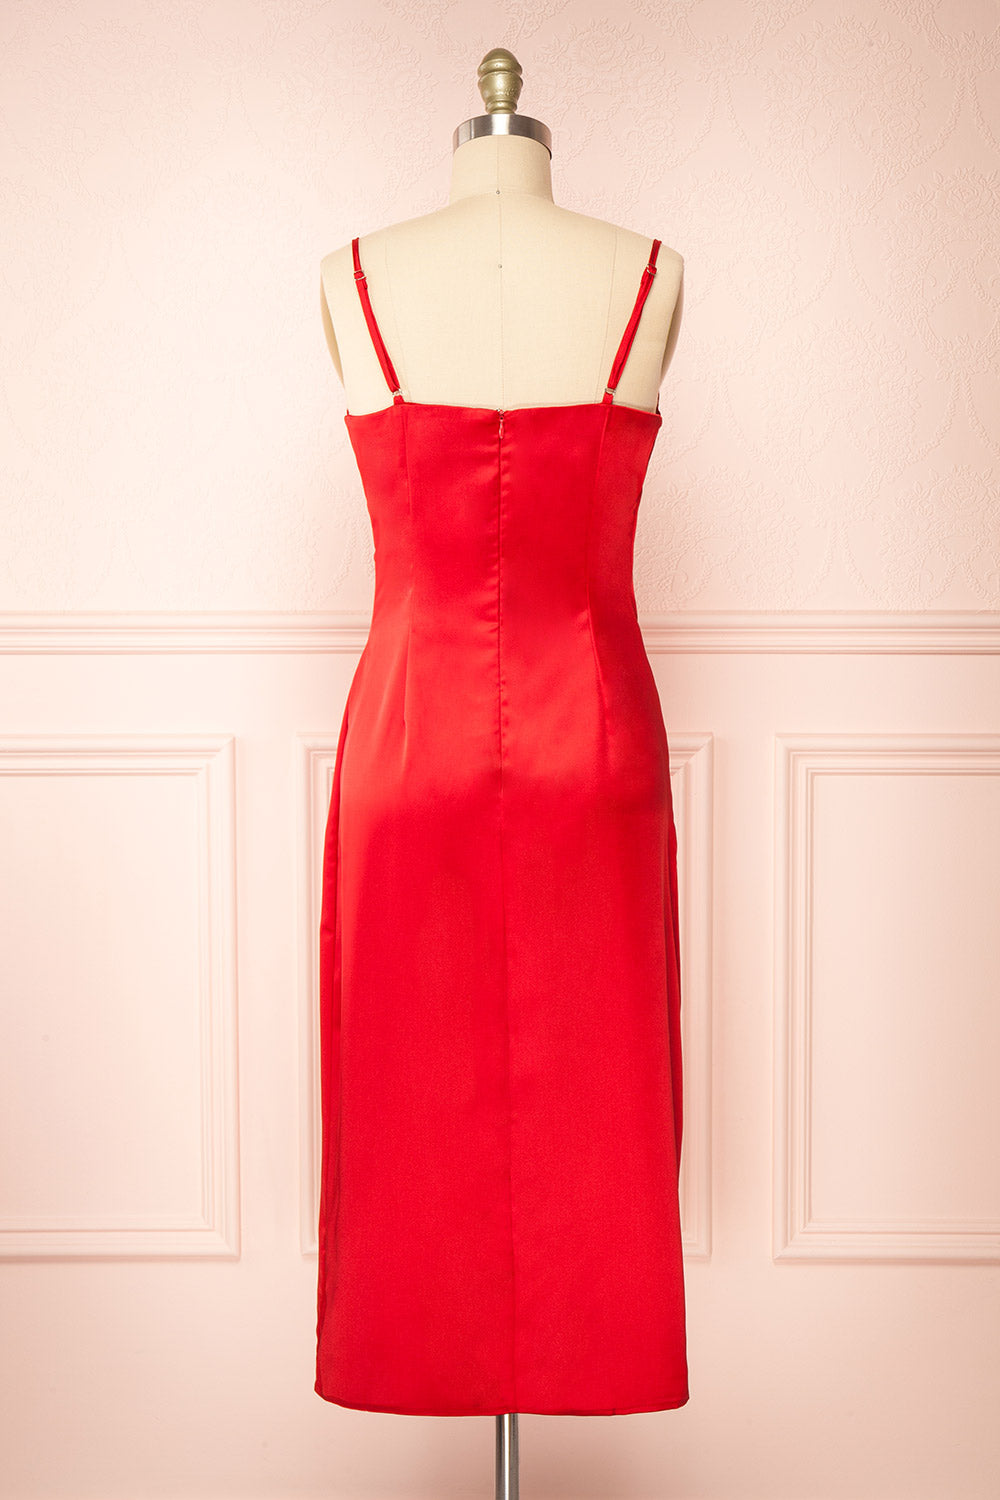 Chloee Red Silky Midi Slip Dress | Boutique 1861 back view